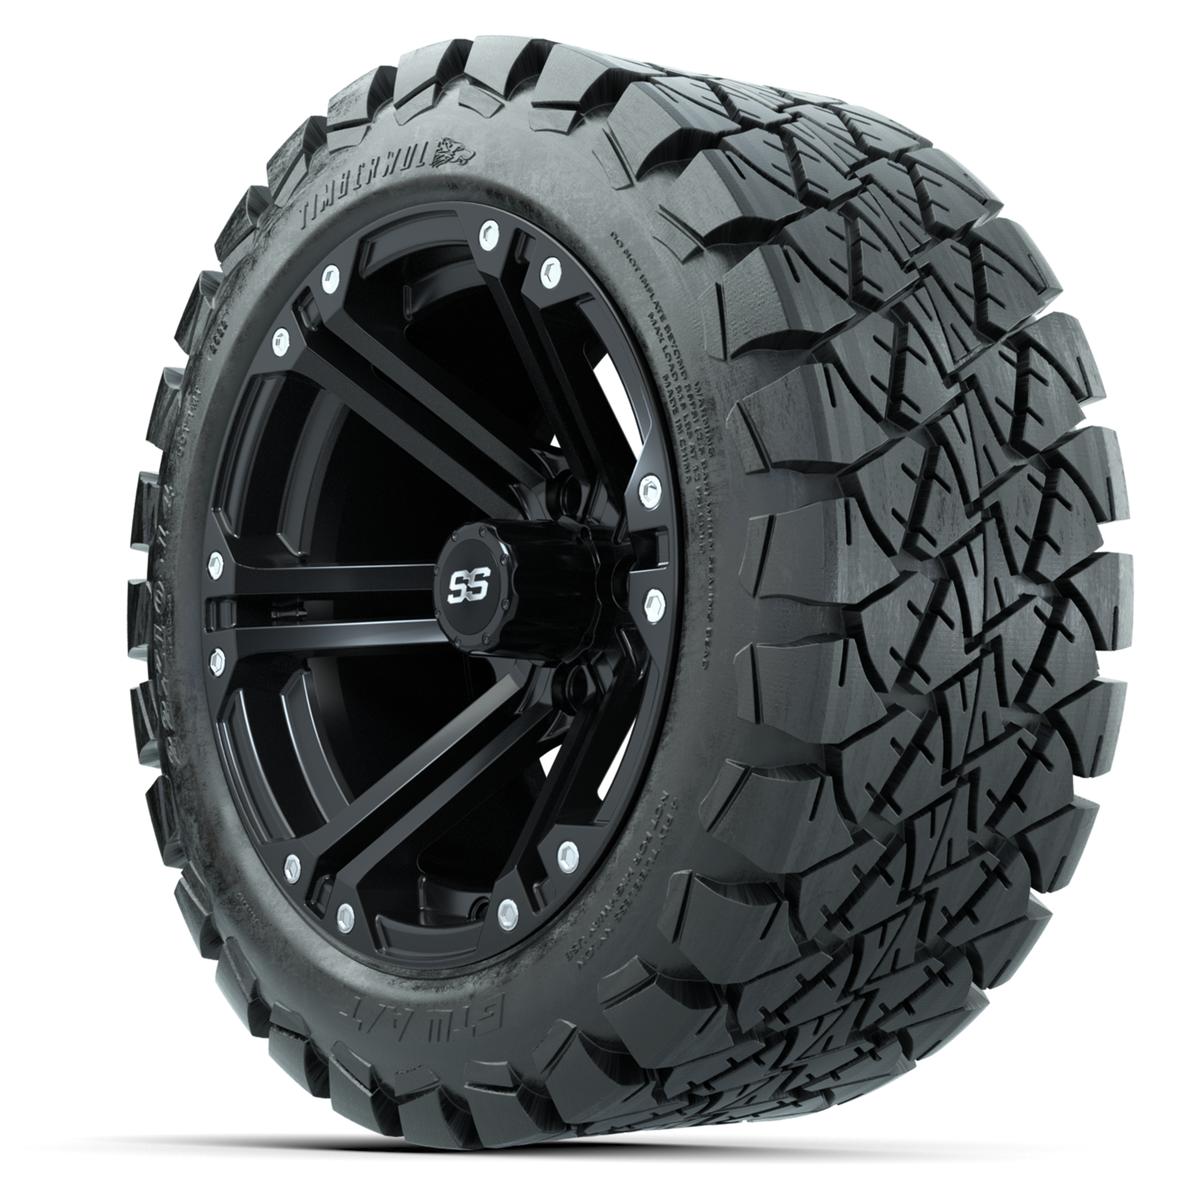 Set of (4) 14 in GTW Specter Wheels with 22x10-14 GTW Timberwolf All-Terrain Tires